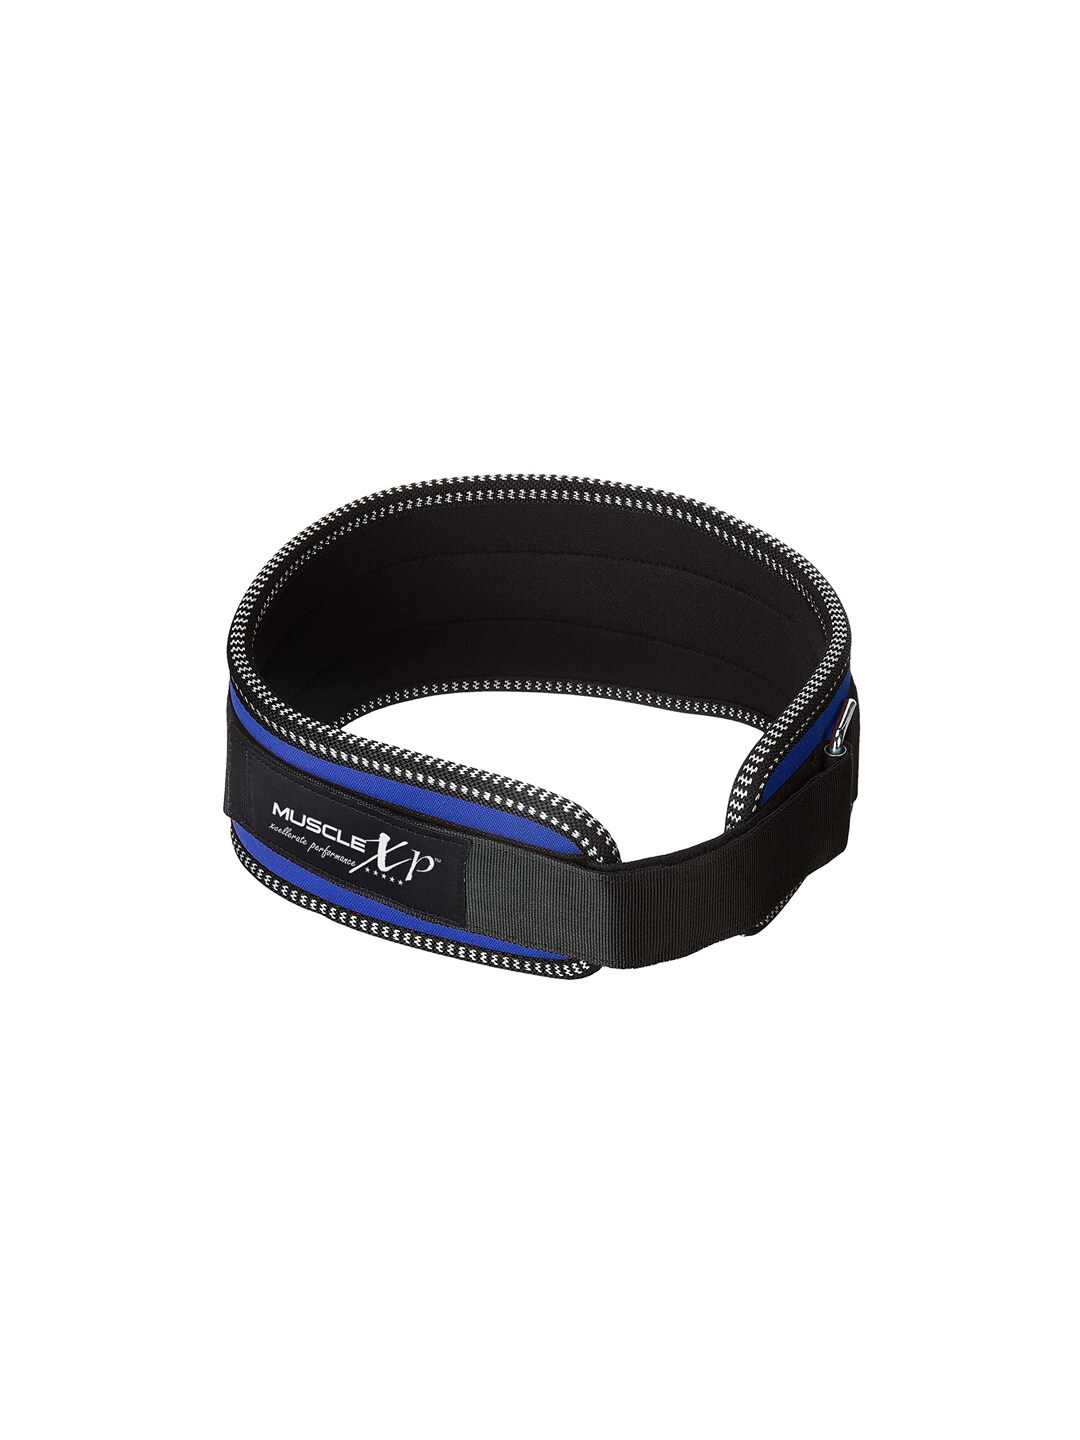 MUSCLEXP Black & Blue Solid Weight Lifting Gym Belt Price in India